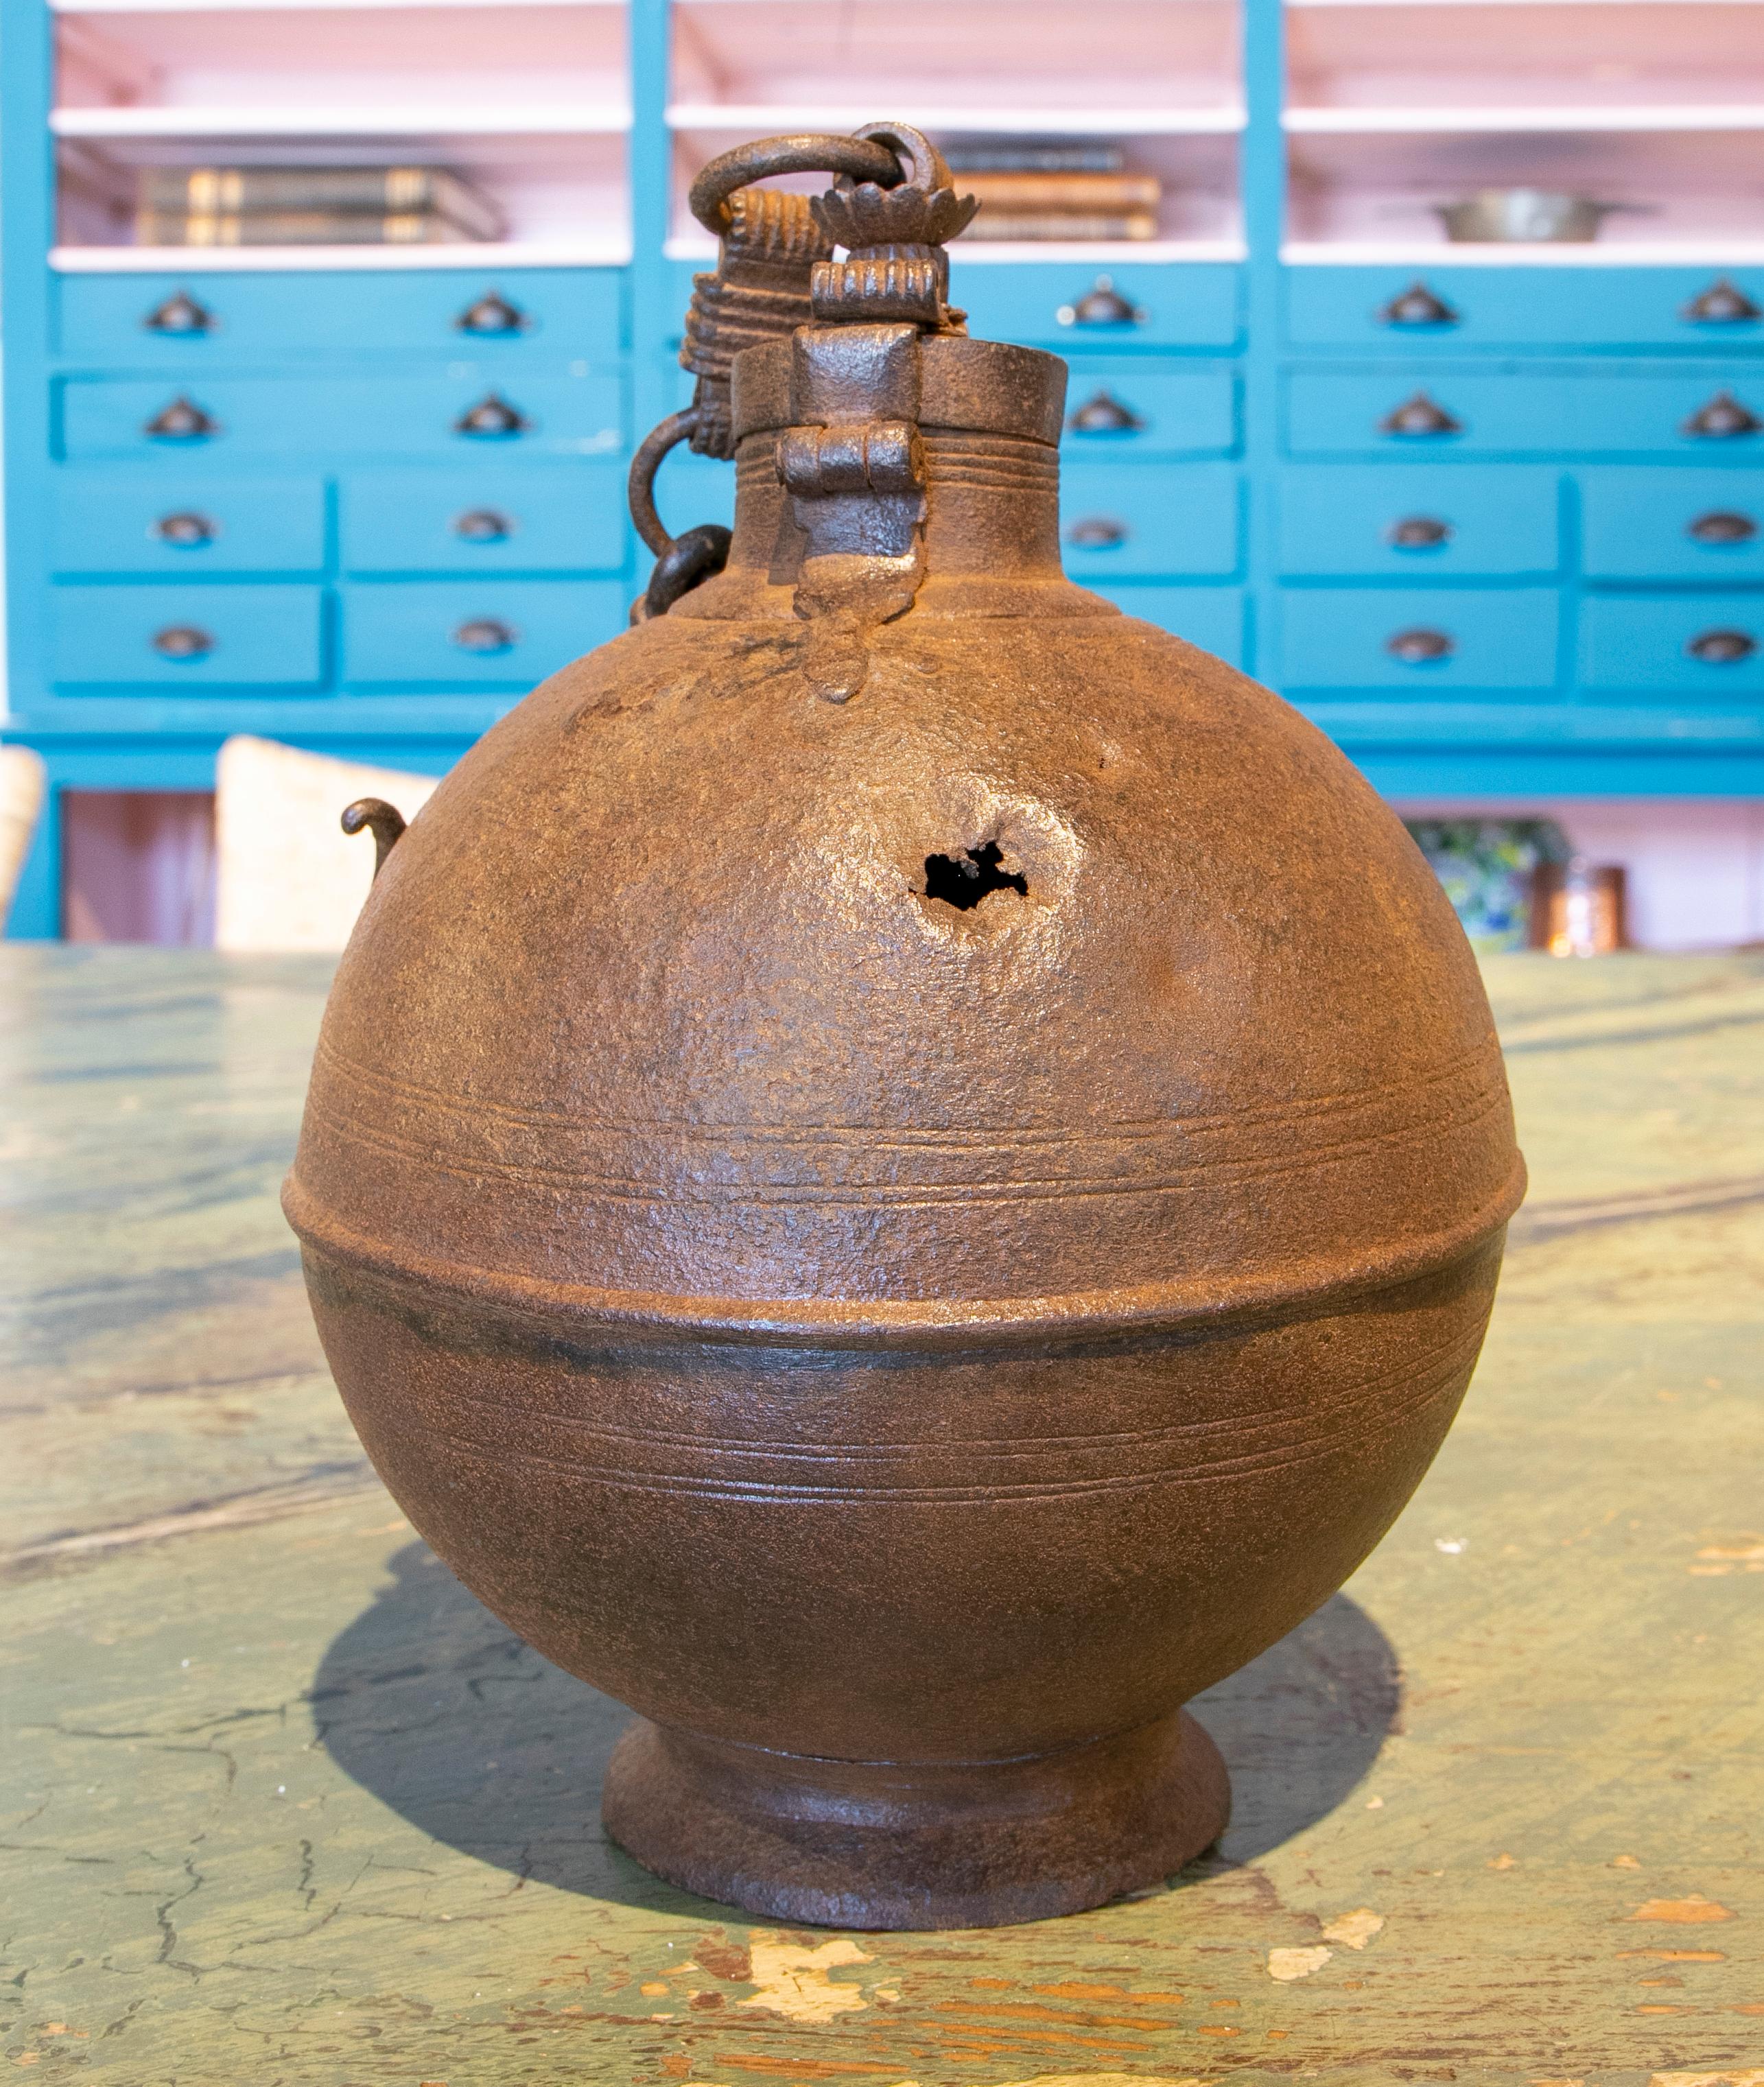 19th century ball-shaped iron box with hook for hanging and a lock.